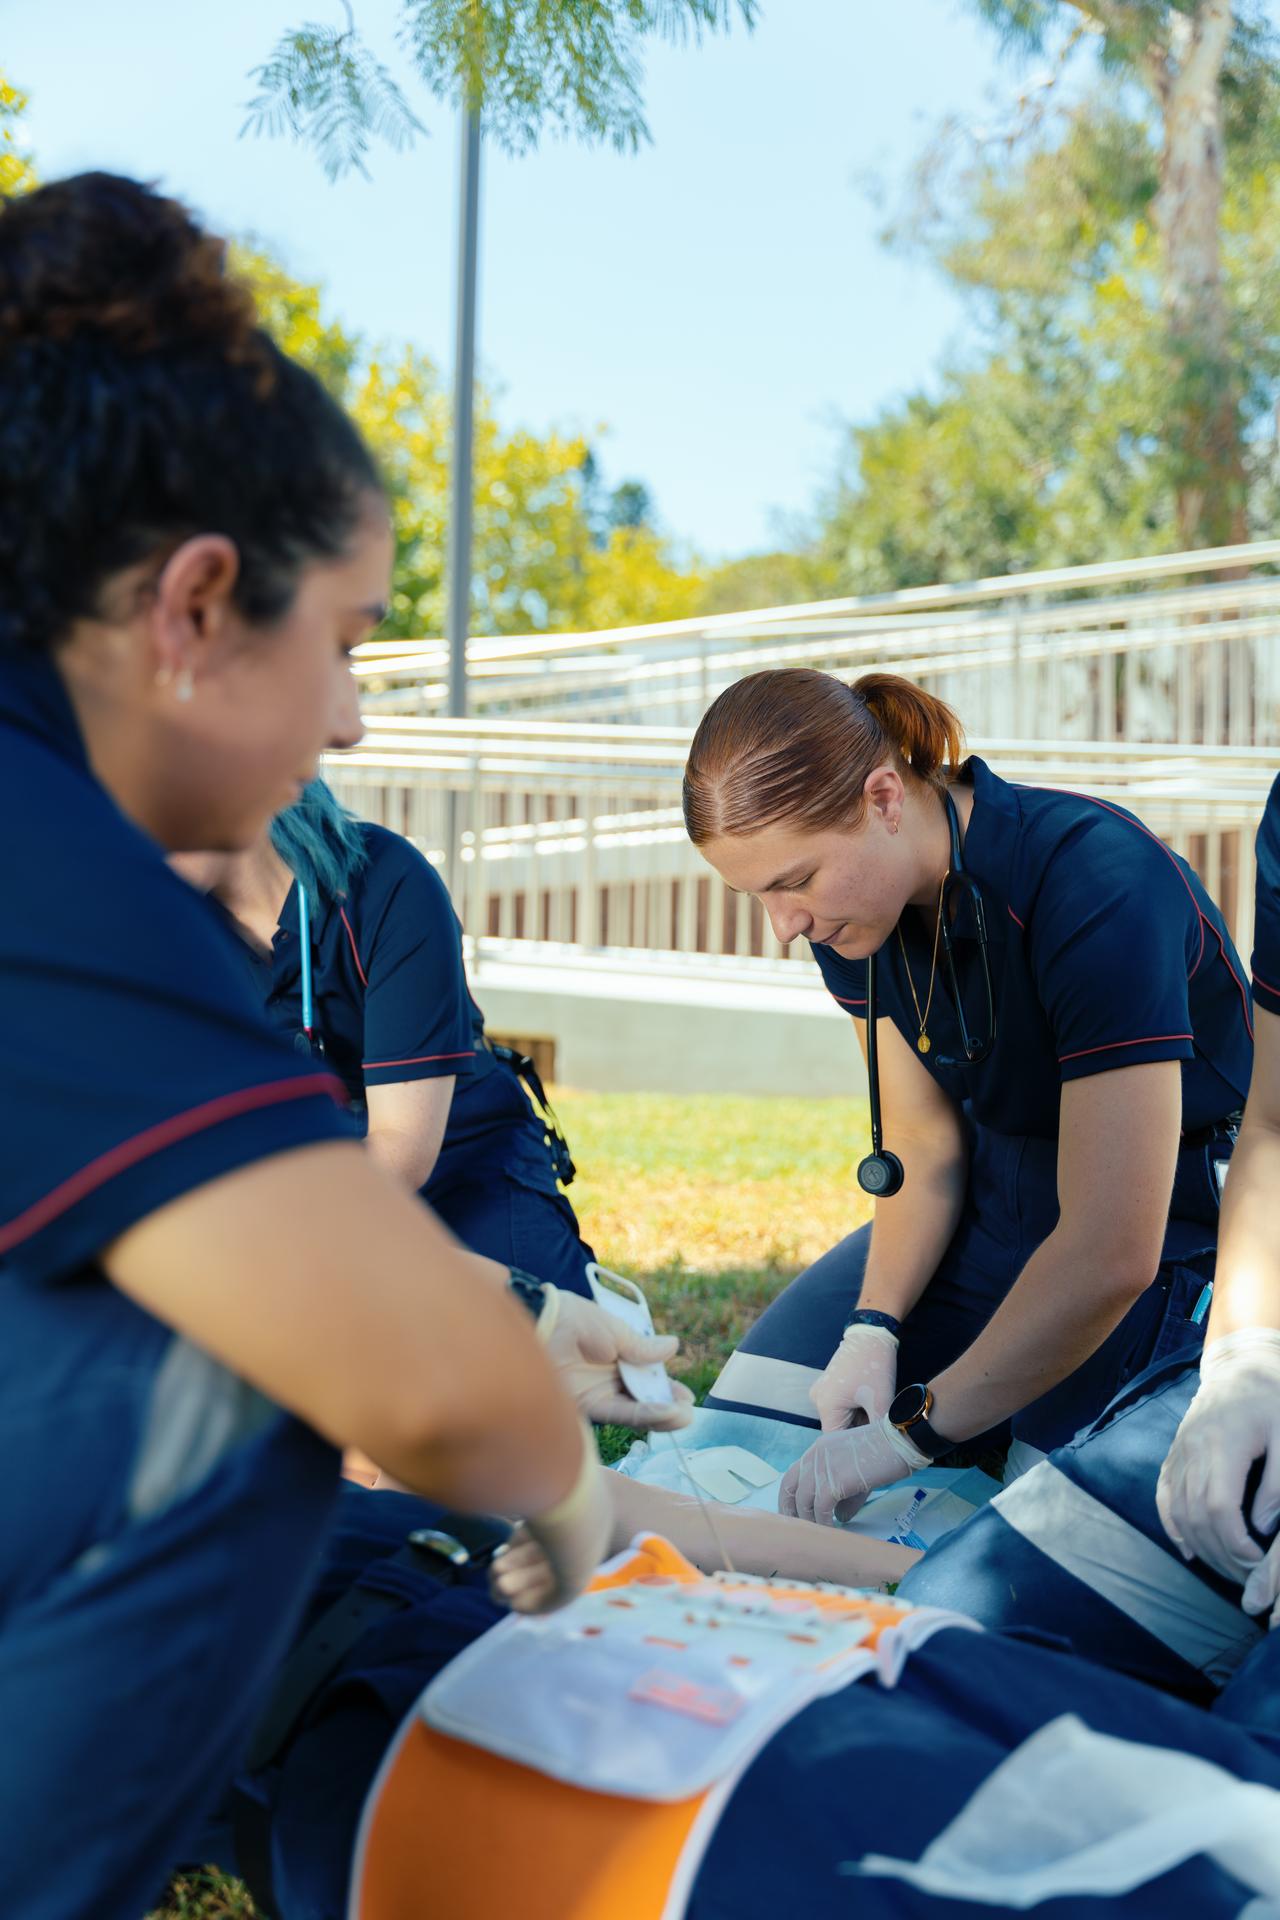 Bachelor of Paramedicine student Lucy Castelletti is studying at the Rozelle campus in Sydney.